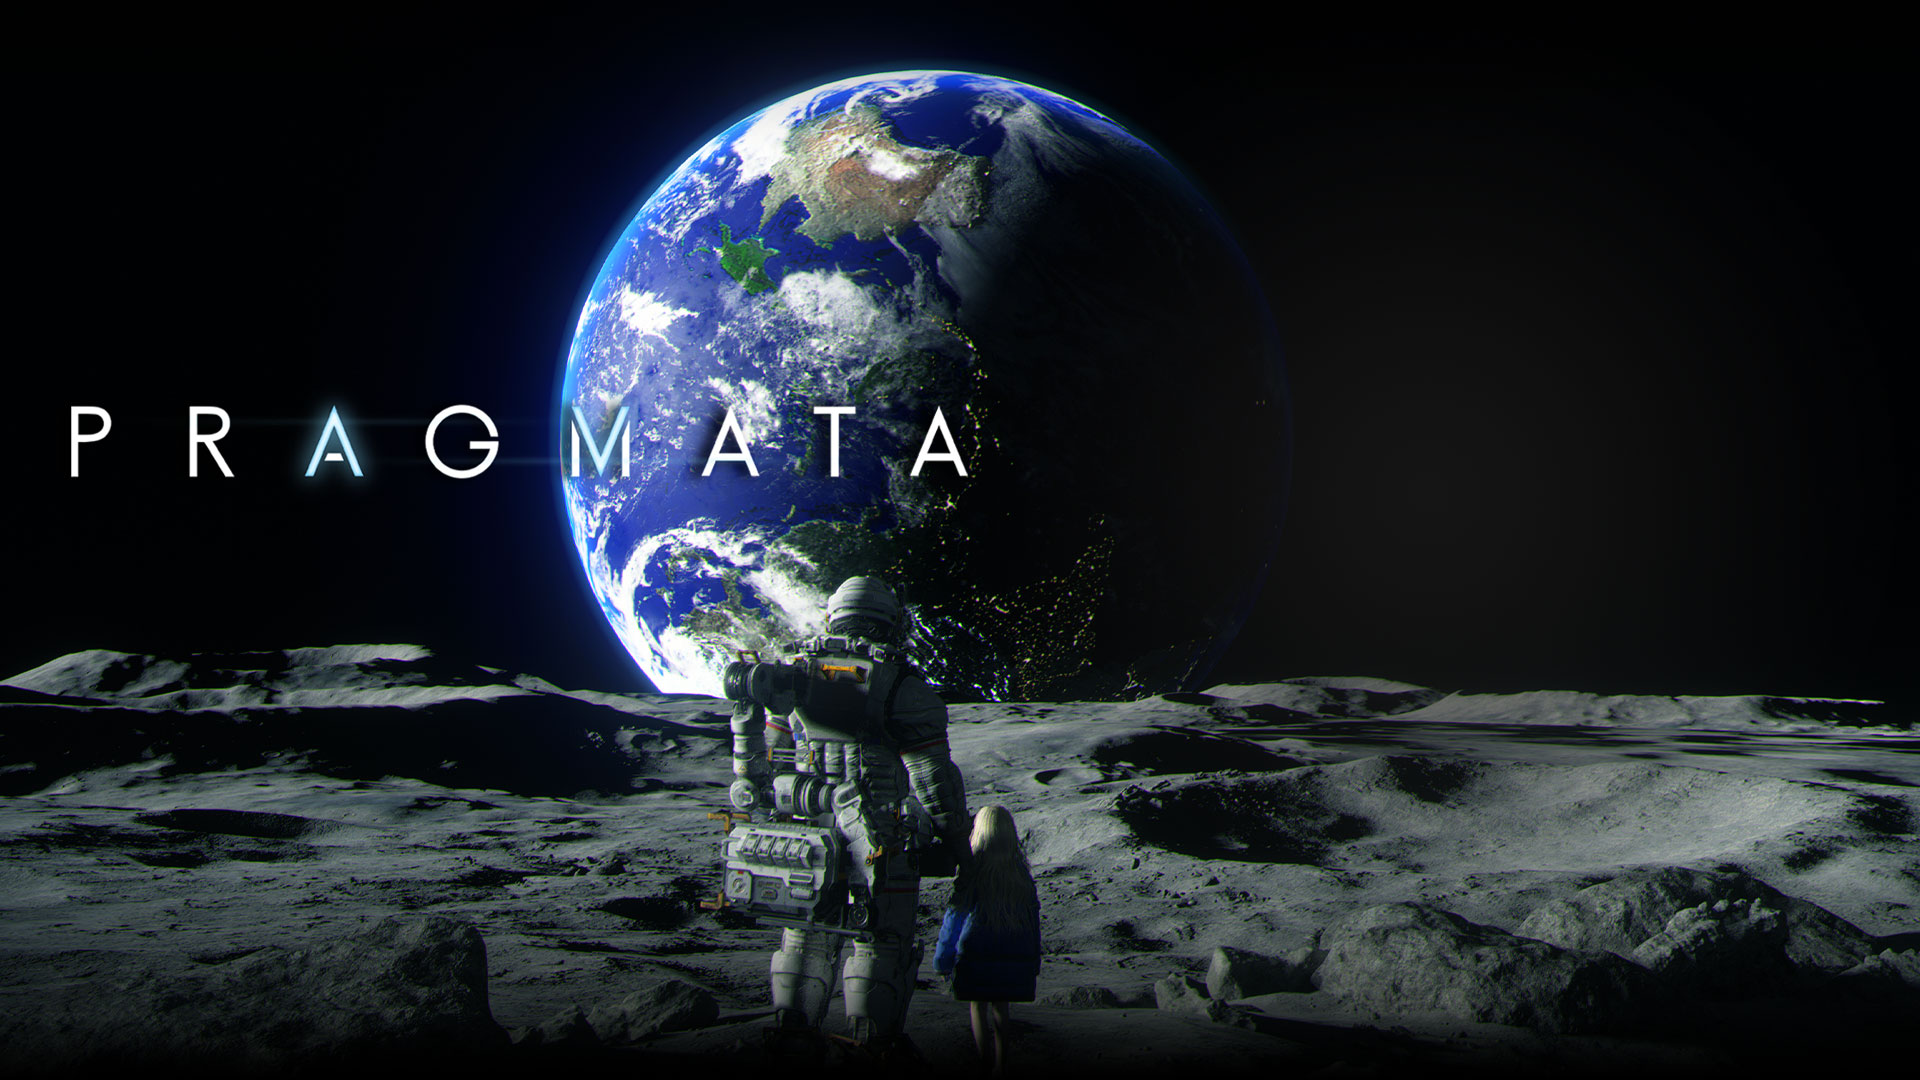 Pragmata, An astronaut and a young girl look at the Earth while standing together on the moon